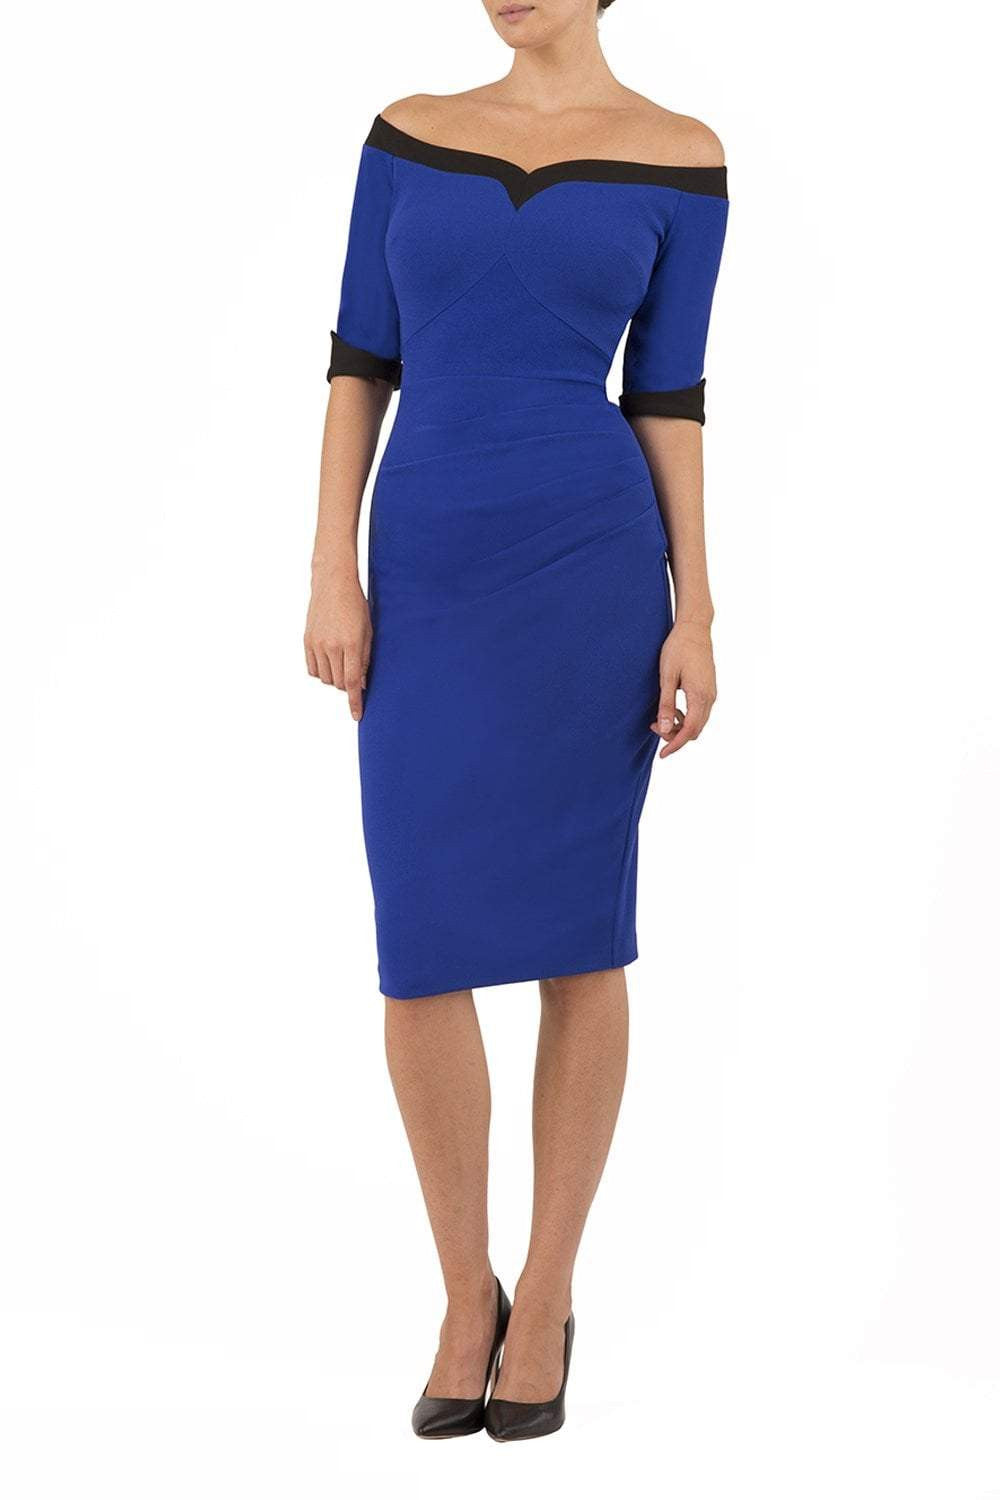 blonde model is wearing diva catwalk fellini sweetheart neckline fitted pencil dress with sleeves with cuff in colour royal blue with black contrasting detail front